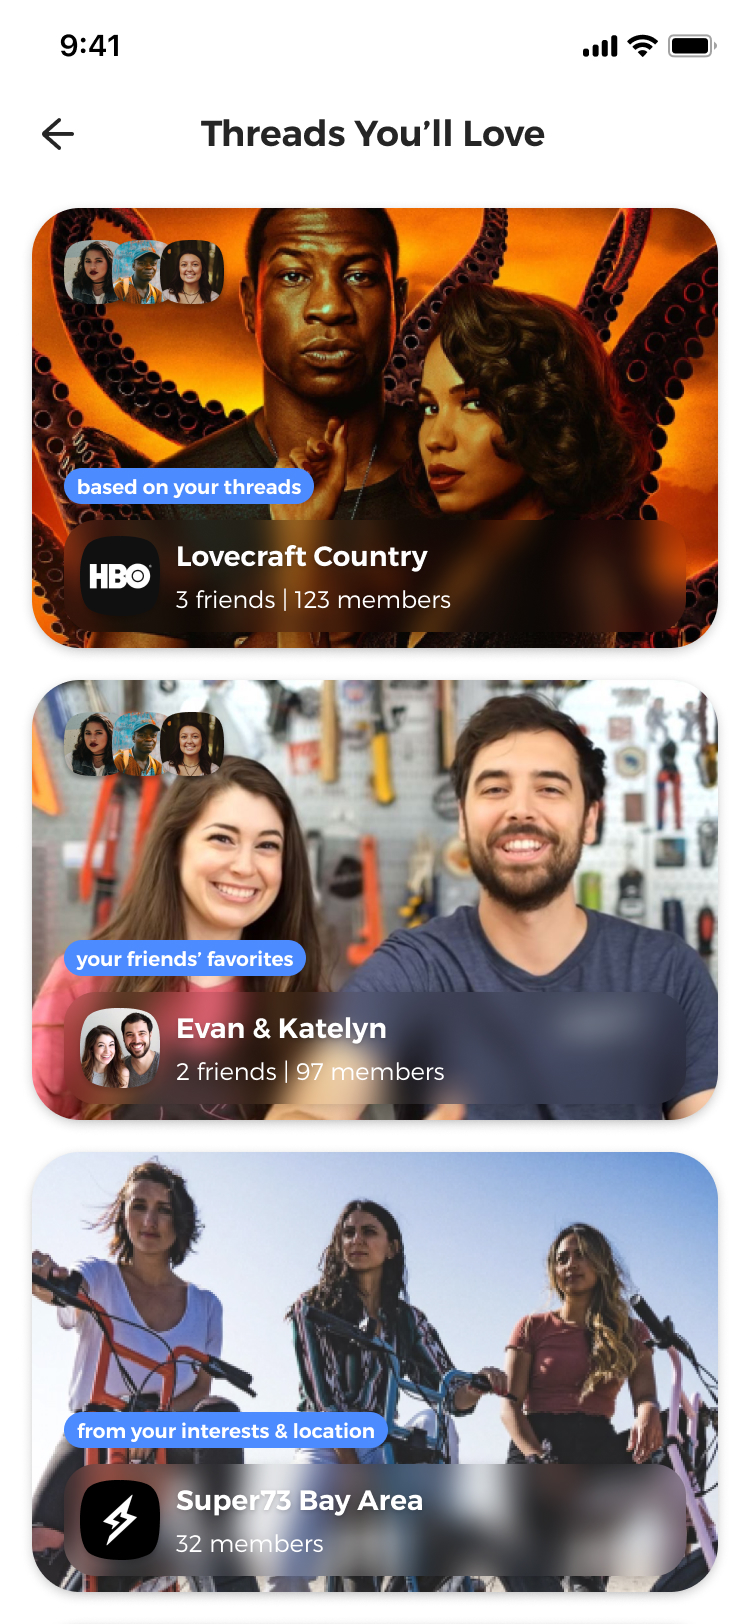 Screens showing user onboarding for the True app.